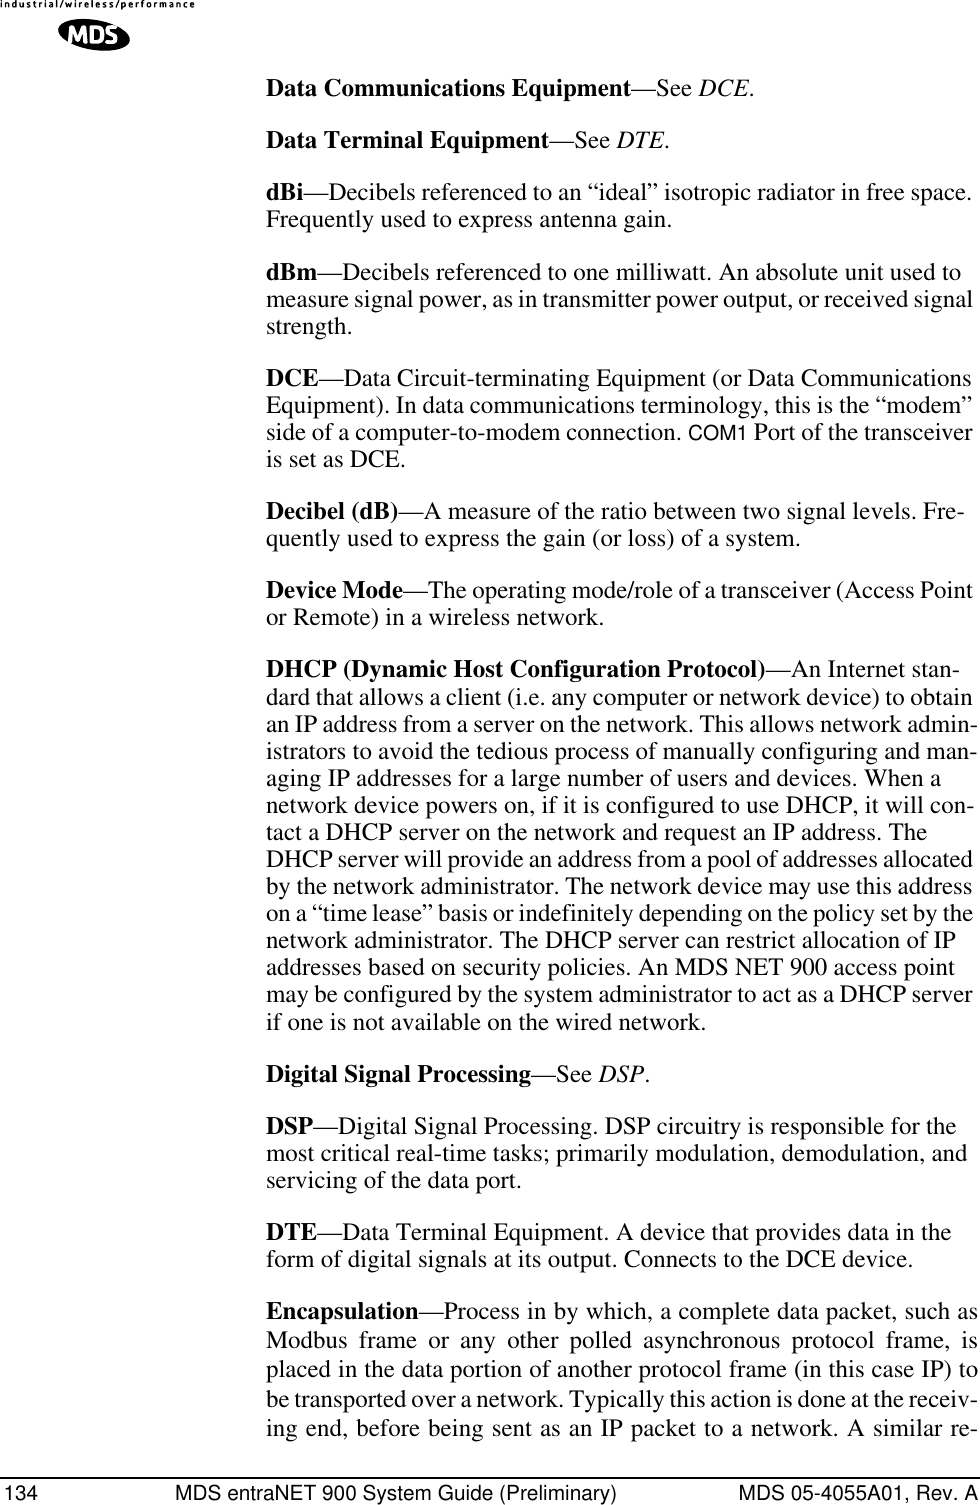 134 MDS entraNET 900 System Guide (Preliminary) MDS 05-4055A01, Rev. AData Communications Equipment—See DCE.Data Terminal Equipment—See DTE.dBi—Decibels referenced to an “ideal” isotropic radiator in free space. Frequently used to express antenna gain.dBm—Decibels referenced to one milliwatt. An absolute unit used to measure signal power, as in transmitter power output, or received signal strength.DCE—Data Circuit-terminating Equipment (or Data Communications Equipment). In data communications terminology, this is the “modem” side of a computer-to-modem connection. COM1 Port of the transceiver is set as DCE.Decibel (dB)—A measure of the ratio between two signal levels. Fre-quently used to express the gain (or loss) of a system.Device Mode—The operating mode/role of a transceiver (Access Point or Remote) in a wireless network.DHCP (Dynamic Host Configuration Protocol)—An Internet stan-dard that allows a client (i.e. any computer or network device) to obtain an IP address from a server on the network. This allows network admin-istrators to avoid the tedious process of manually configuring and man-aging IP addresses for a large number of users and devices. When a network device powers on, if it is configured to use DHCP, it will con-tact a DHCP server on the network and request an IP address. The DHCP server will provide an address from a pool of addresses allocated by the network administrator. The network device may use this address on a “time lease” basis or indefinitely depending on the policy set by the network administrator. The DHCP server can restrict allocation of IP addresses based on security policies. An MDS NET 900 access point may be configured by the system administrator to act as a DHCP server if one is not available on the wired network.Digital Signal Processing—See DSP.DSP—Digital Signal Processing. DSP circuitry is responsible for the most critical real-time tasks; primarily modulation, demodulation, and servicing of the data port.DTE—Data Terminal Equipment. A device that provides data in the form of digital signals at its output. Connects to the DCE device.Encapsulation—Process in by which, a complete data packet, such asModbus frame or any other polled asynchronous protocol frame, isplaced in the data portion of another protocol frame (in this case IP) tobe transported over a network. Typically this action is done at the receiv-ing end, before being sent as an IP packet to a network. A similar re-